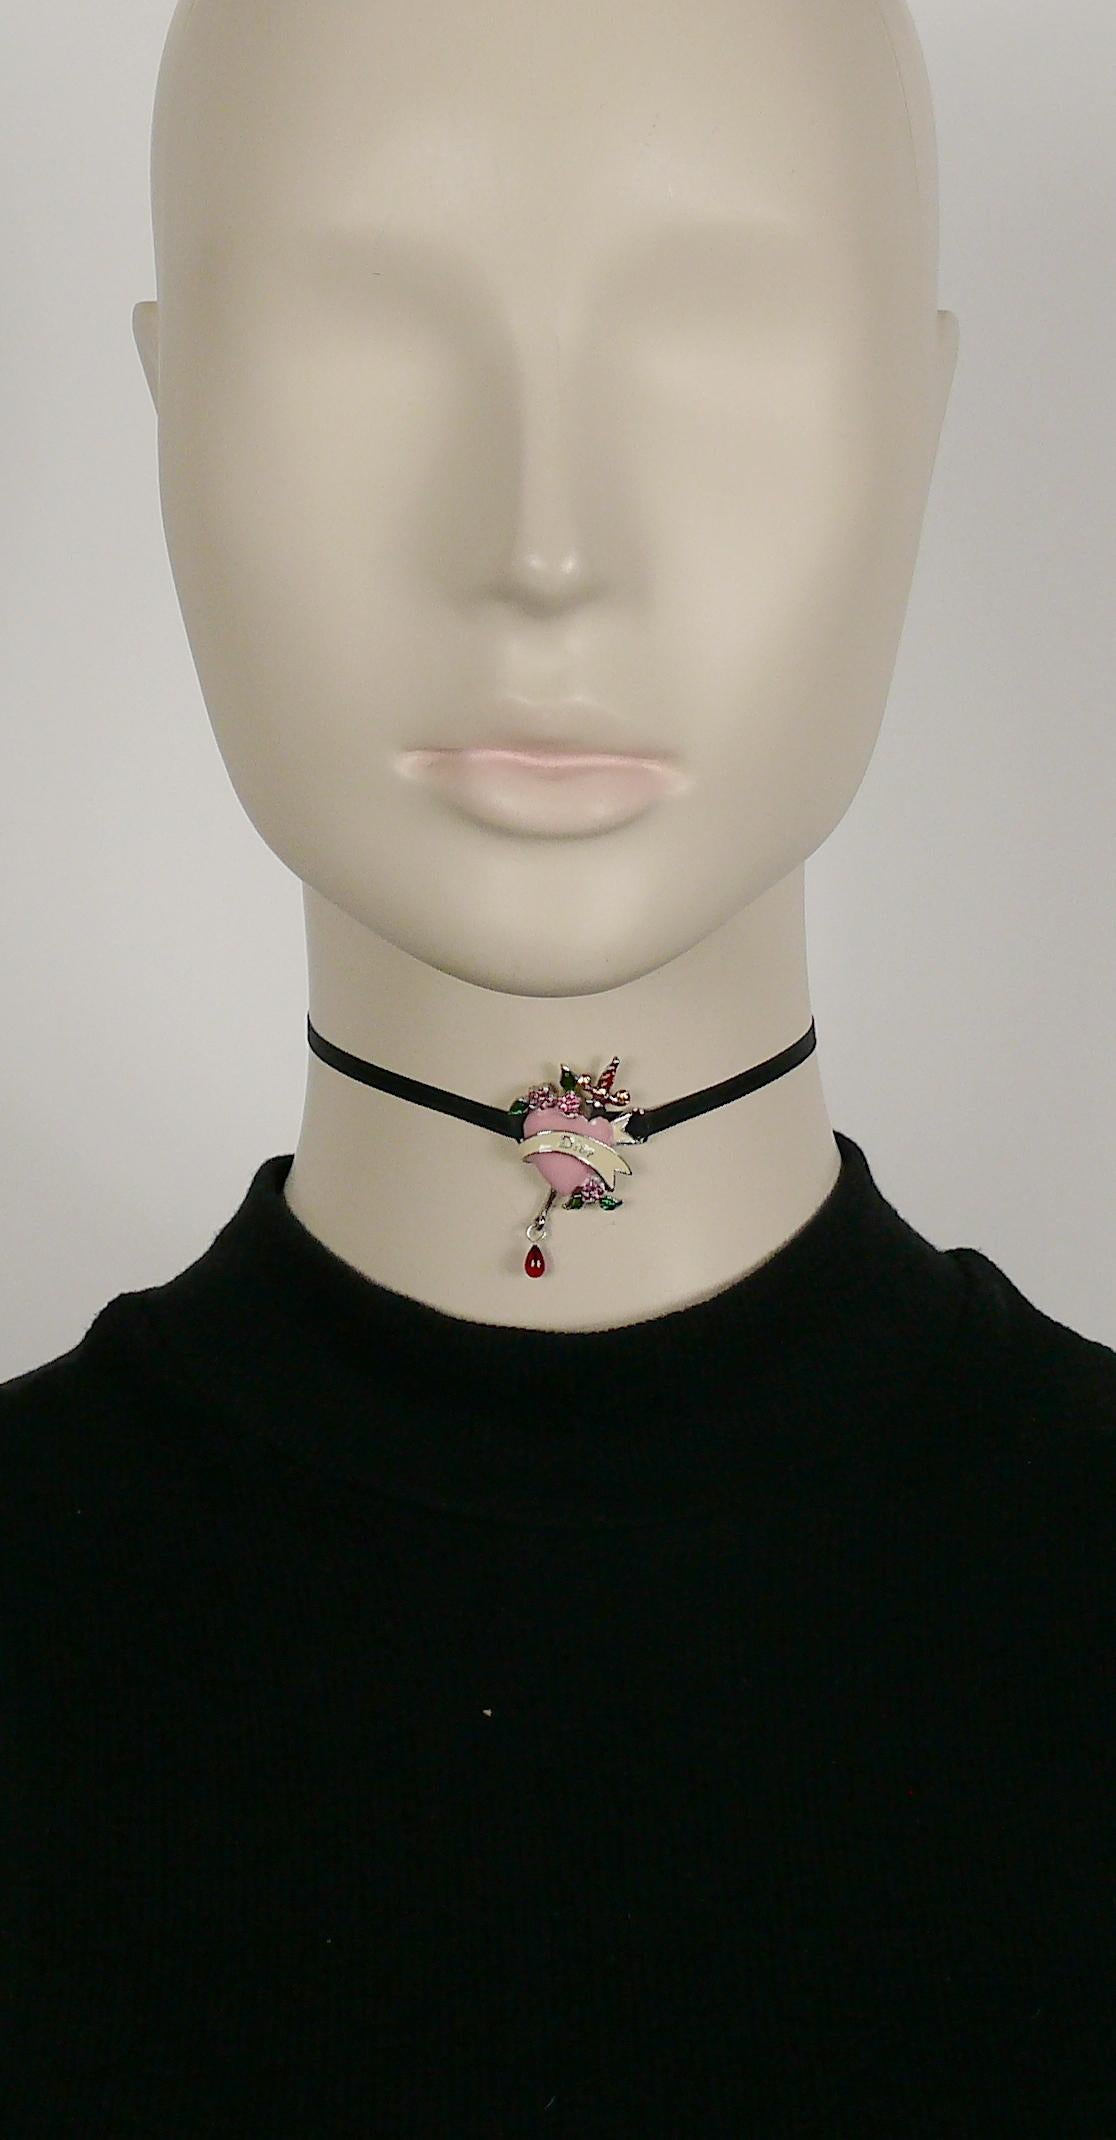 CHRISTIAN DIOR choker necklace featuring an enameled pierced heart with sword embellished with multicolored crystals and a red glass drop.

Black satin ribbon ties in the back.
One size fits all.

Marked DIOR.

Comes with original box (used